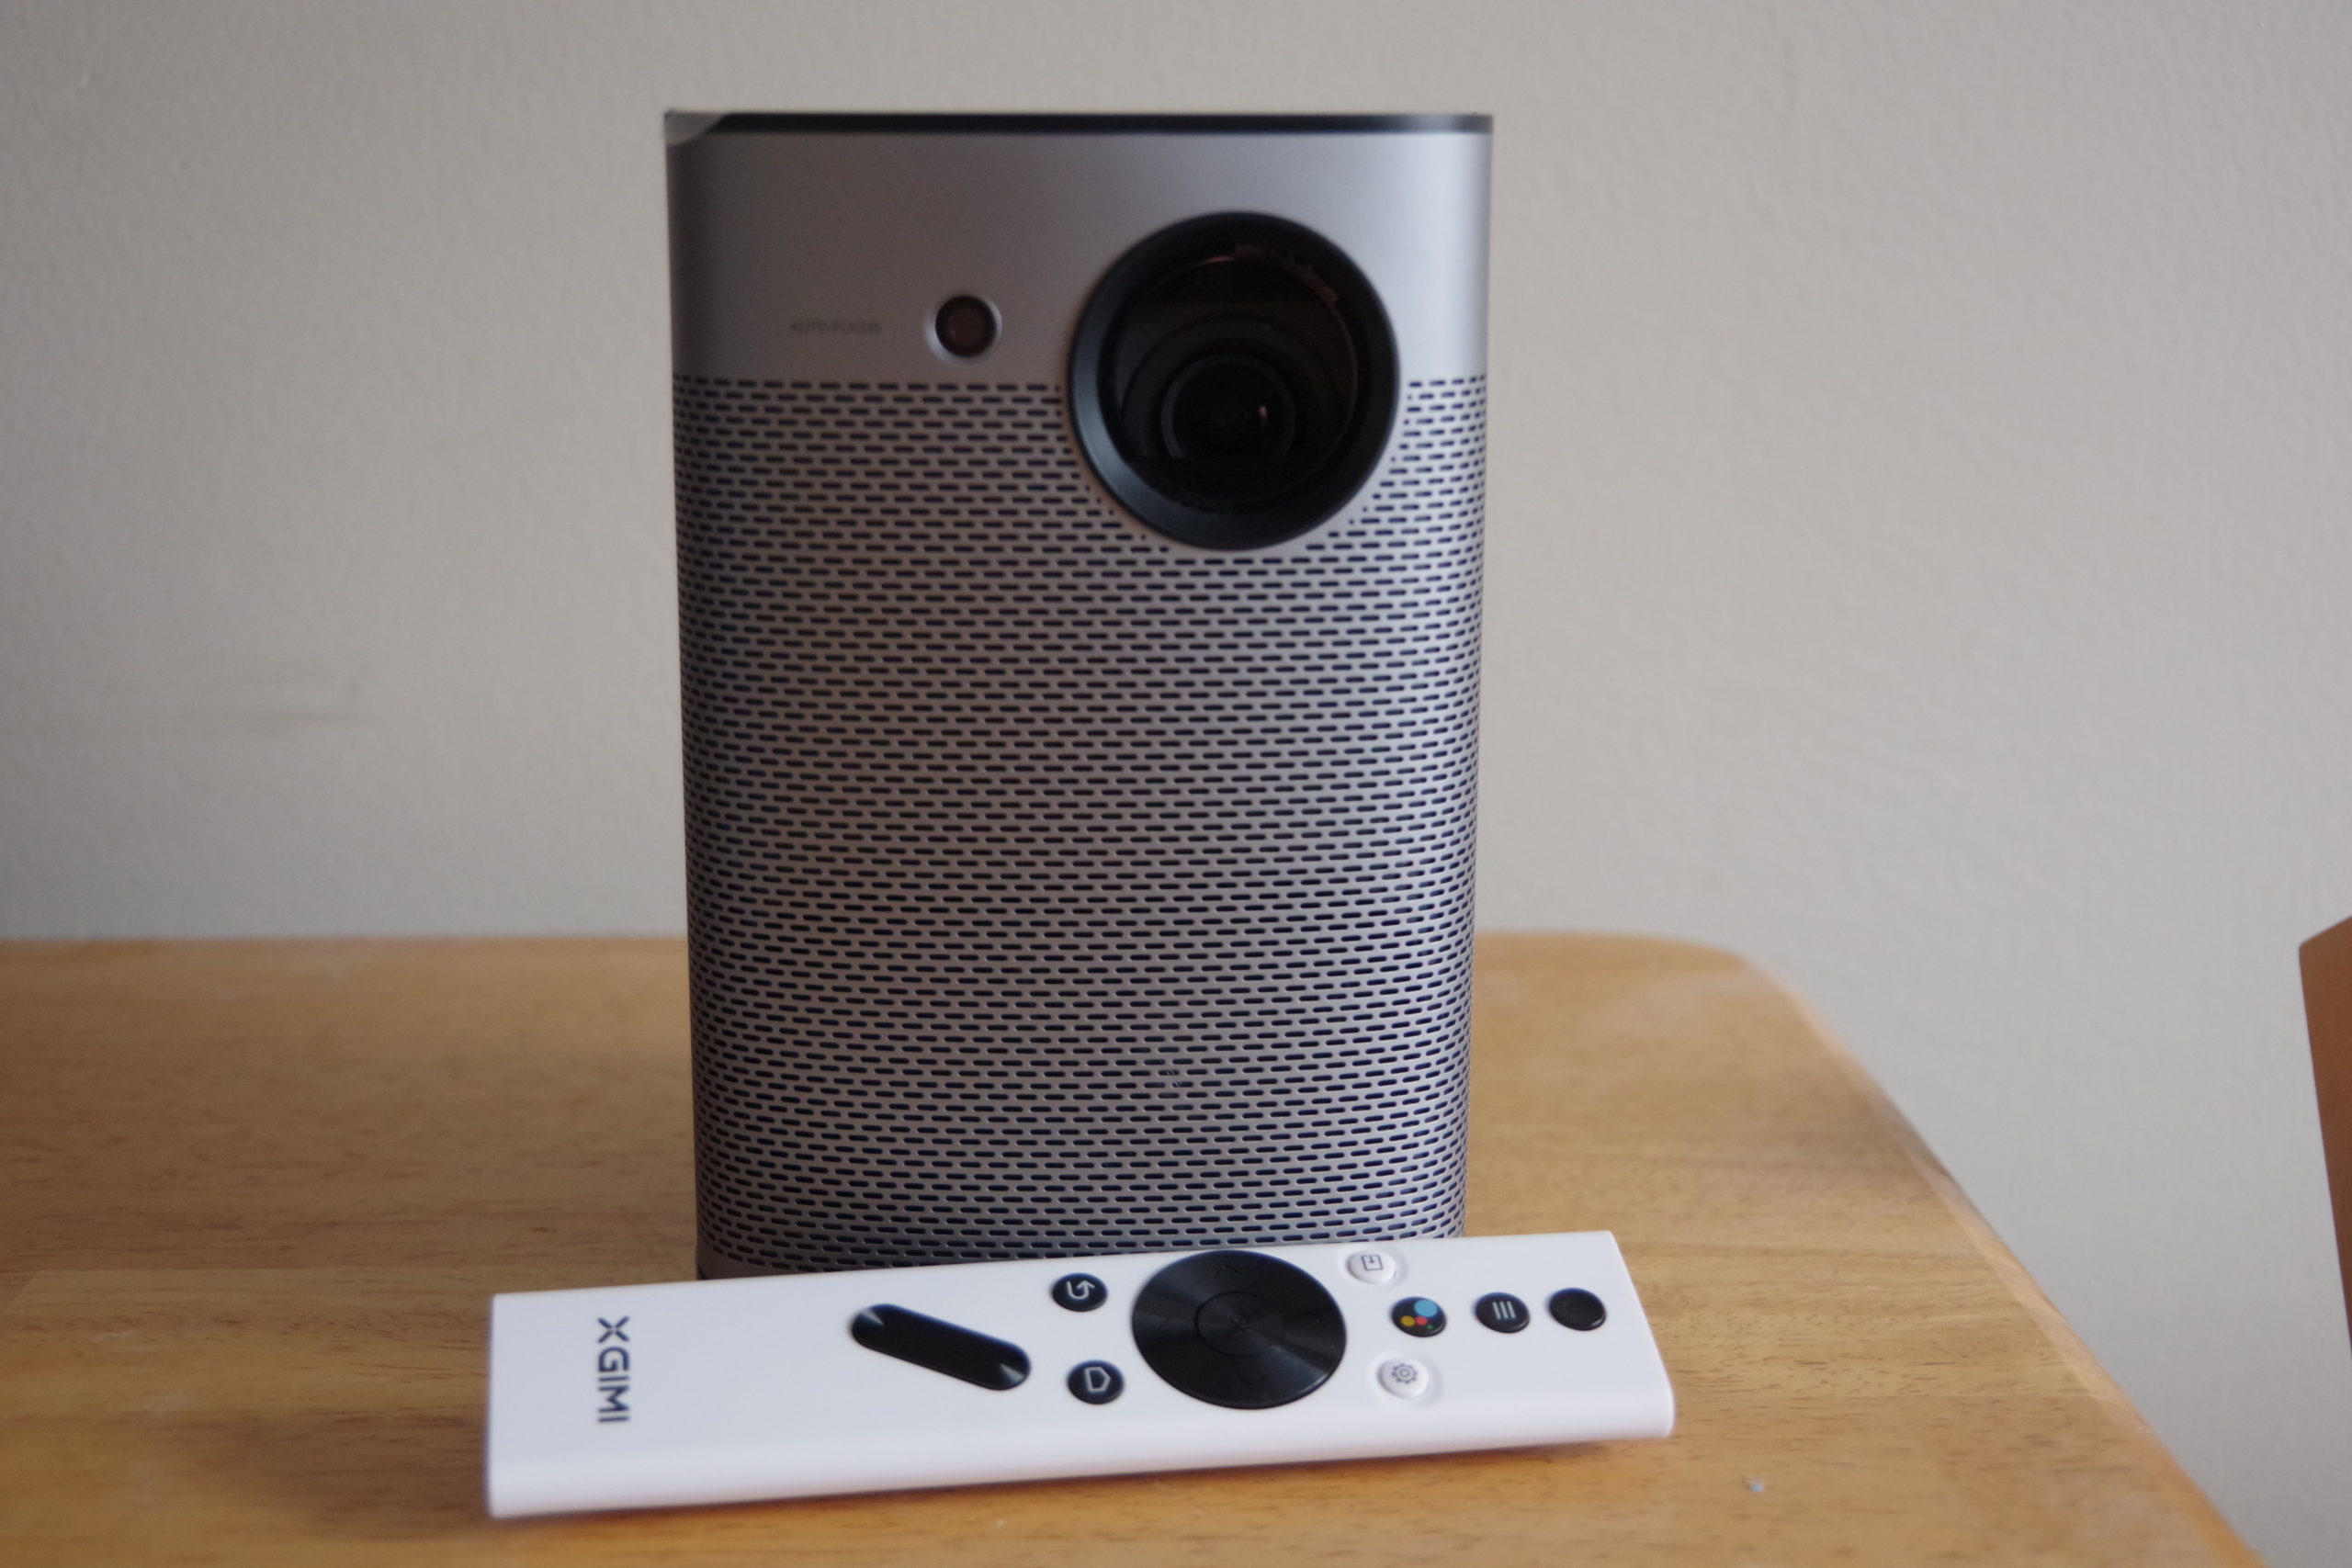 Xgimi Halo Review - The Best Portable Smart Projector on the Planet